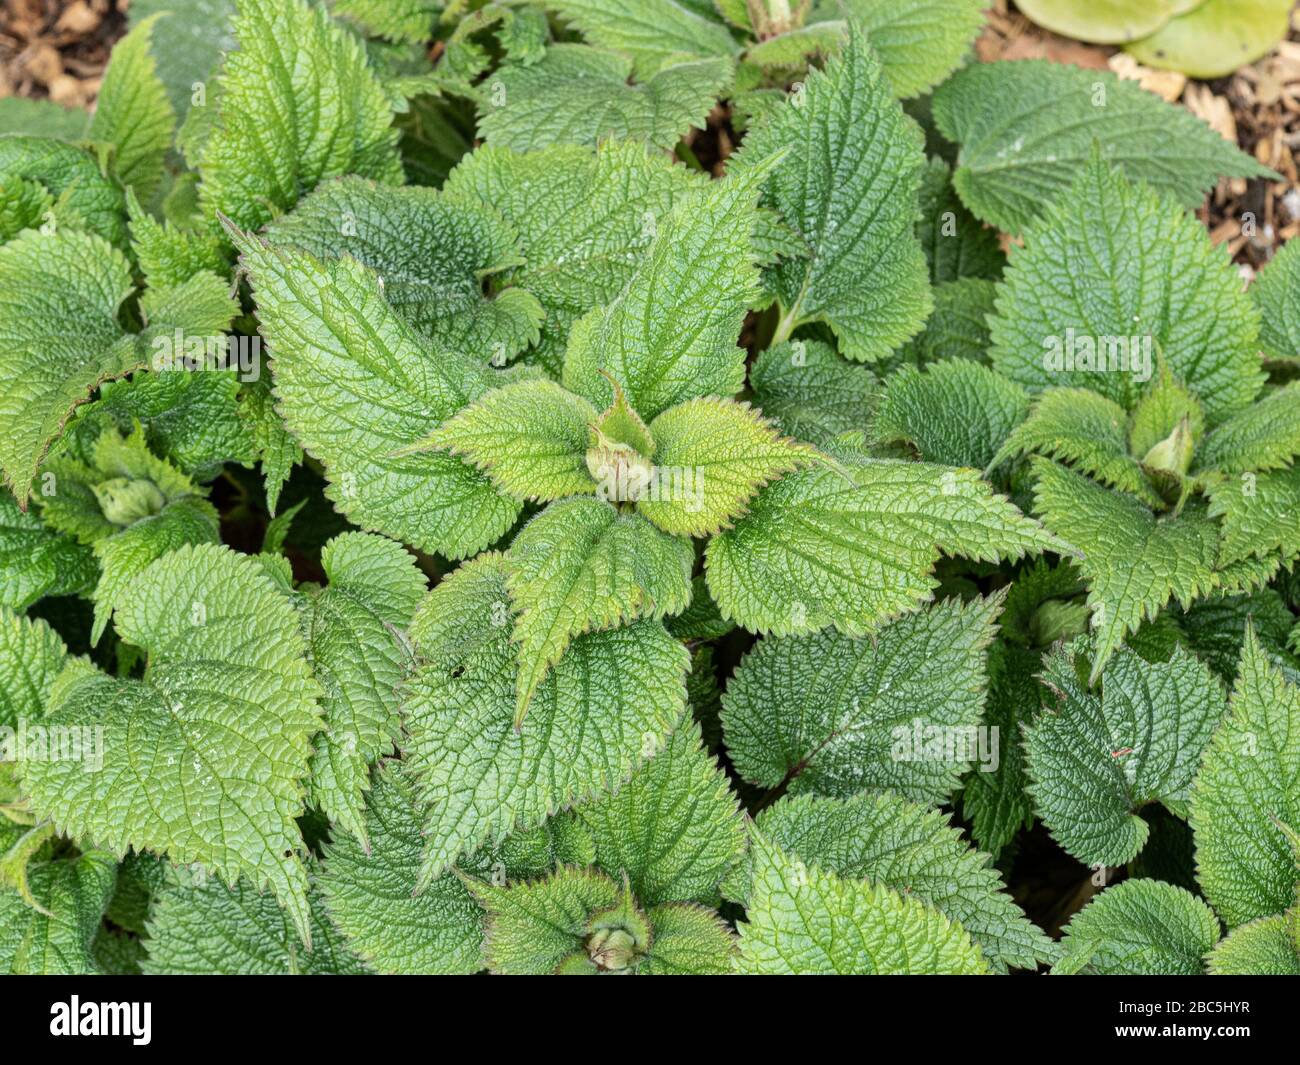 The deep green foliage of Lamium orvala showing the deeply veined and toothed leaves Stock Photo